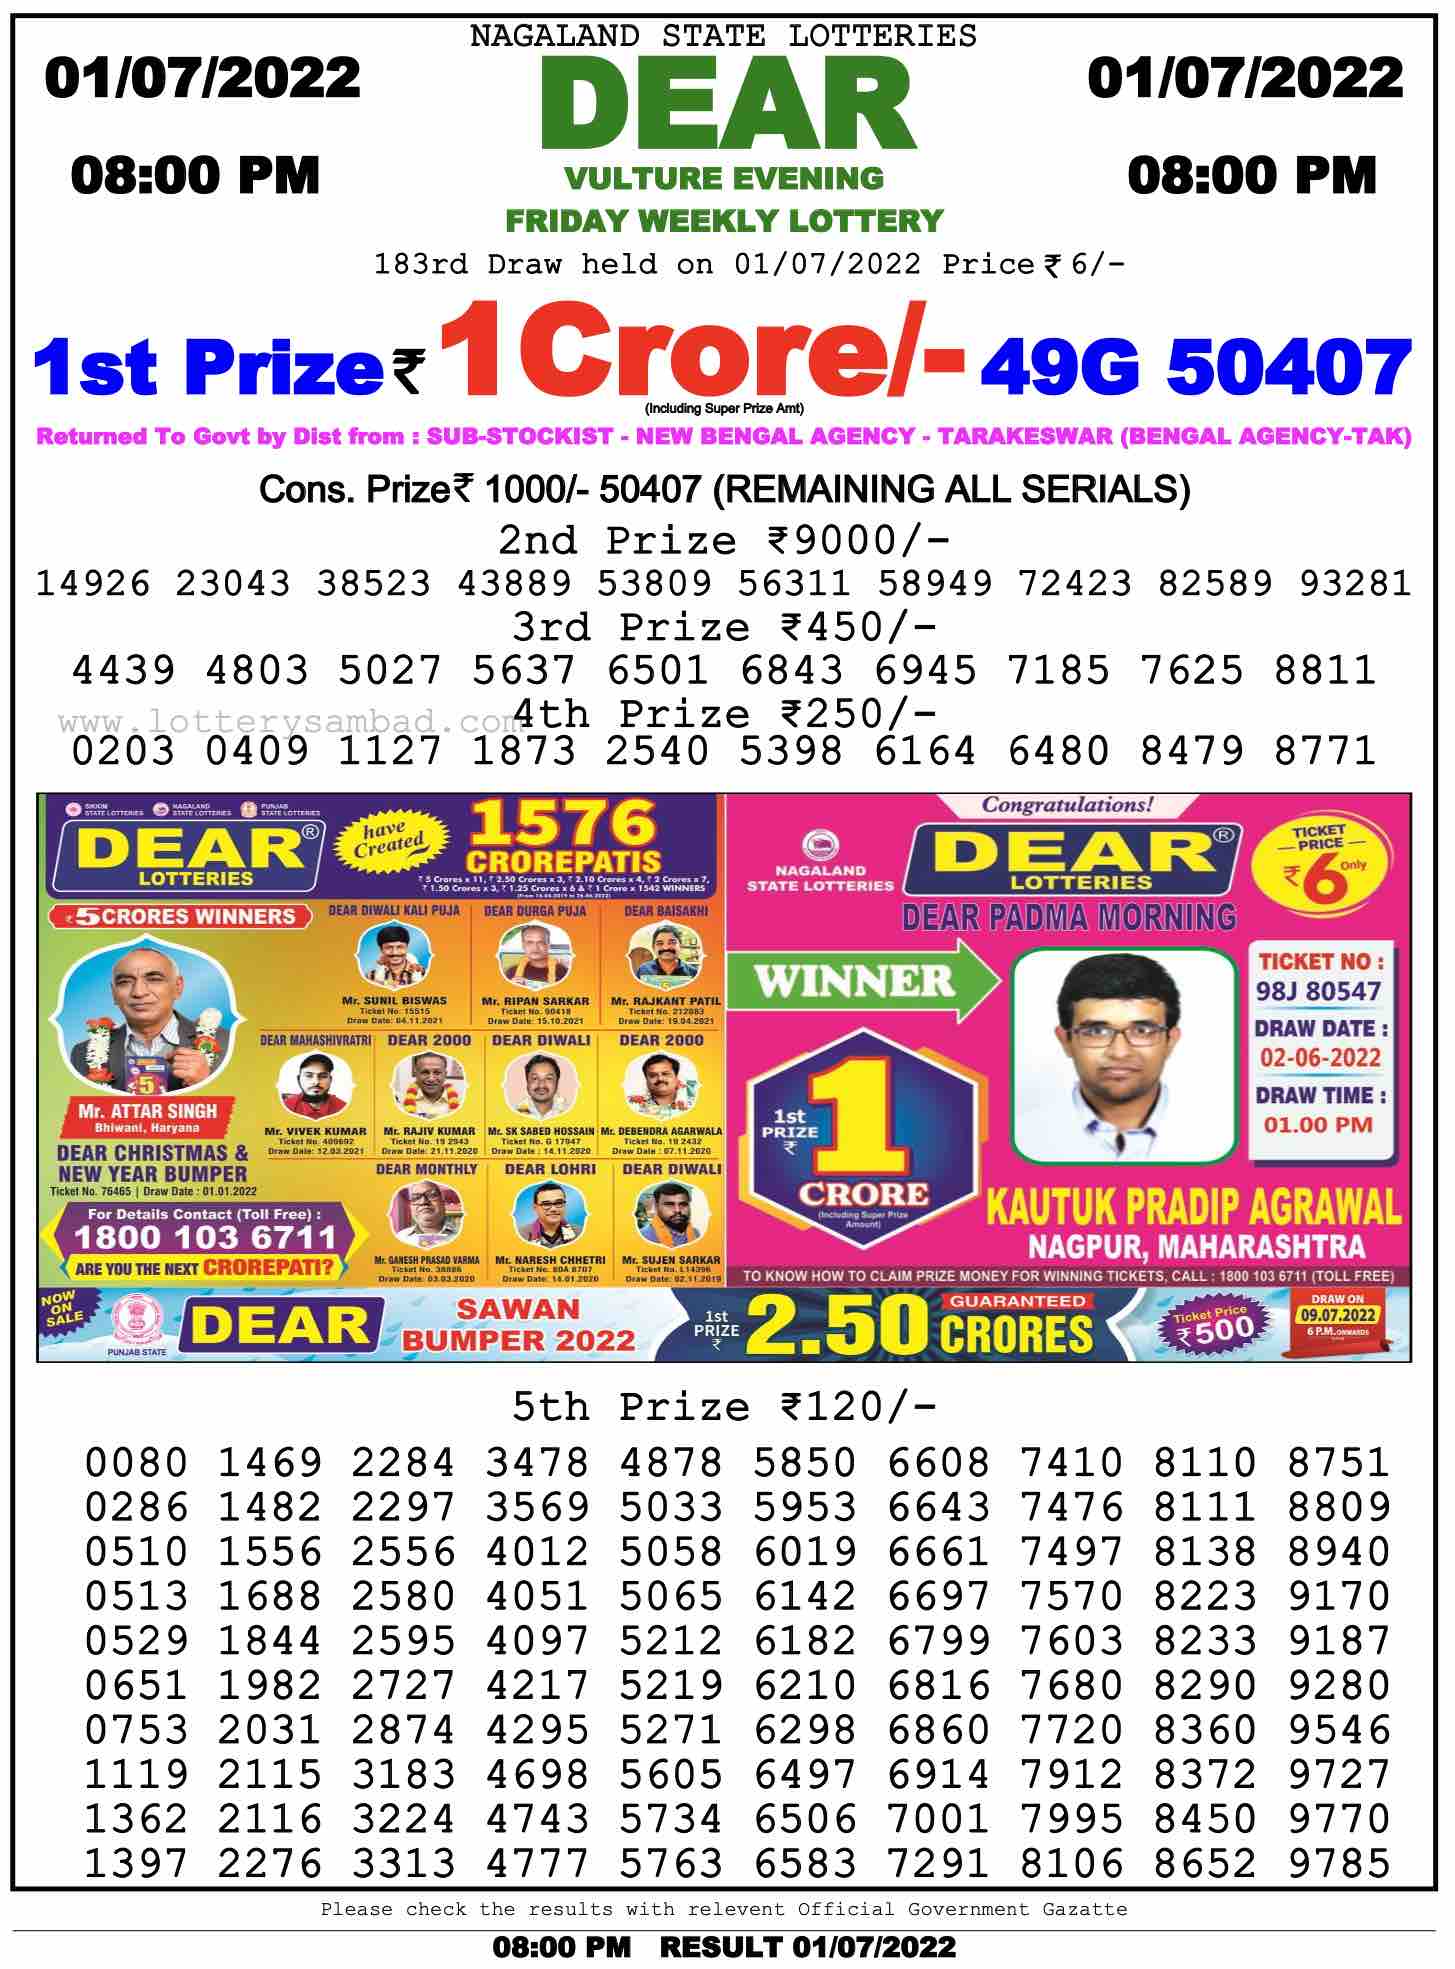 Download Result of Nagaland State Dear 6 Draw 01-07-2022 Draw at 8:00Pm